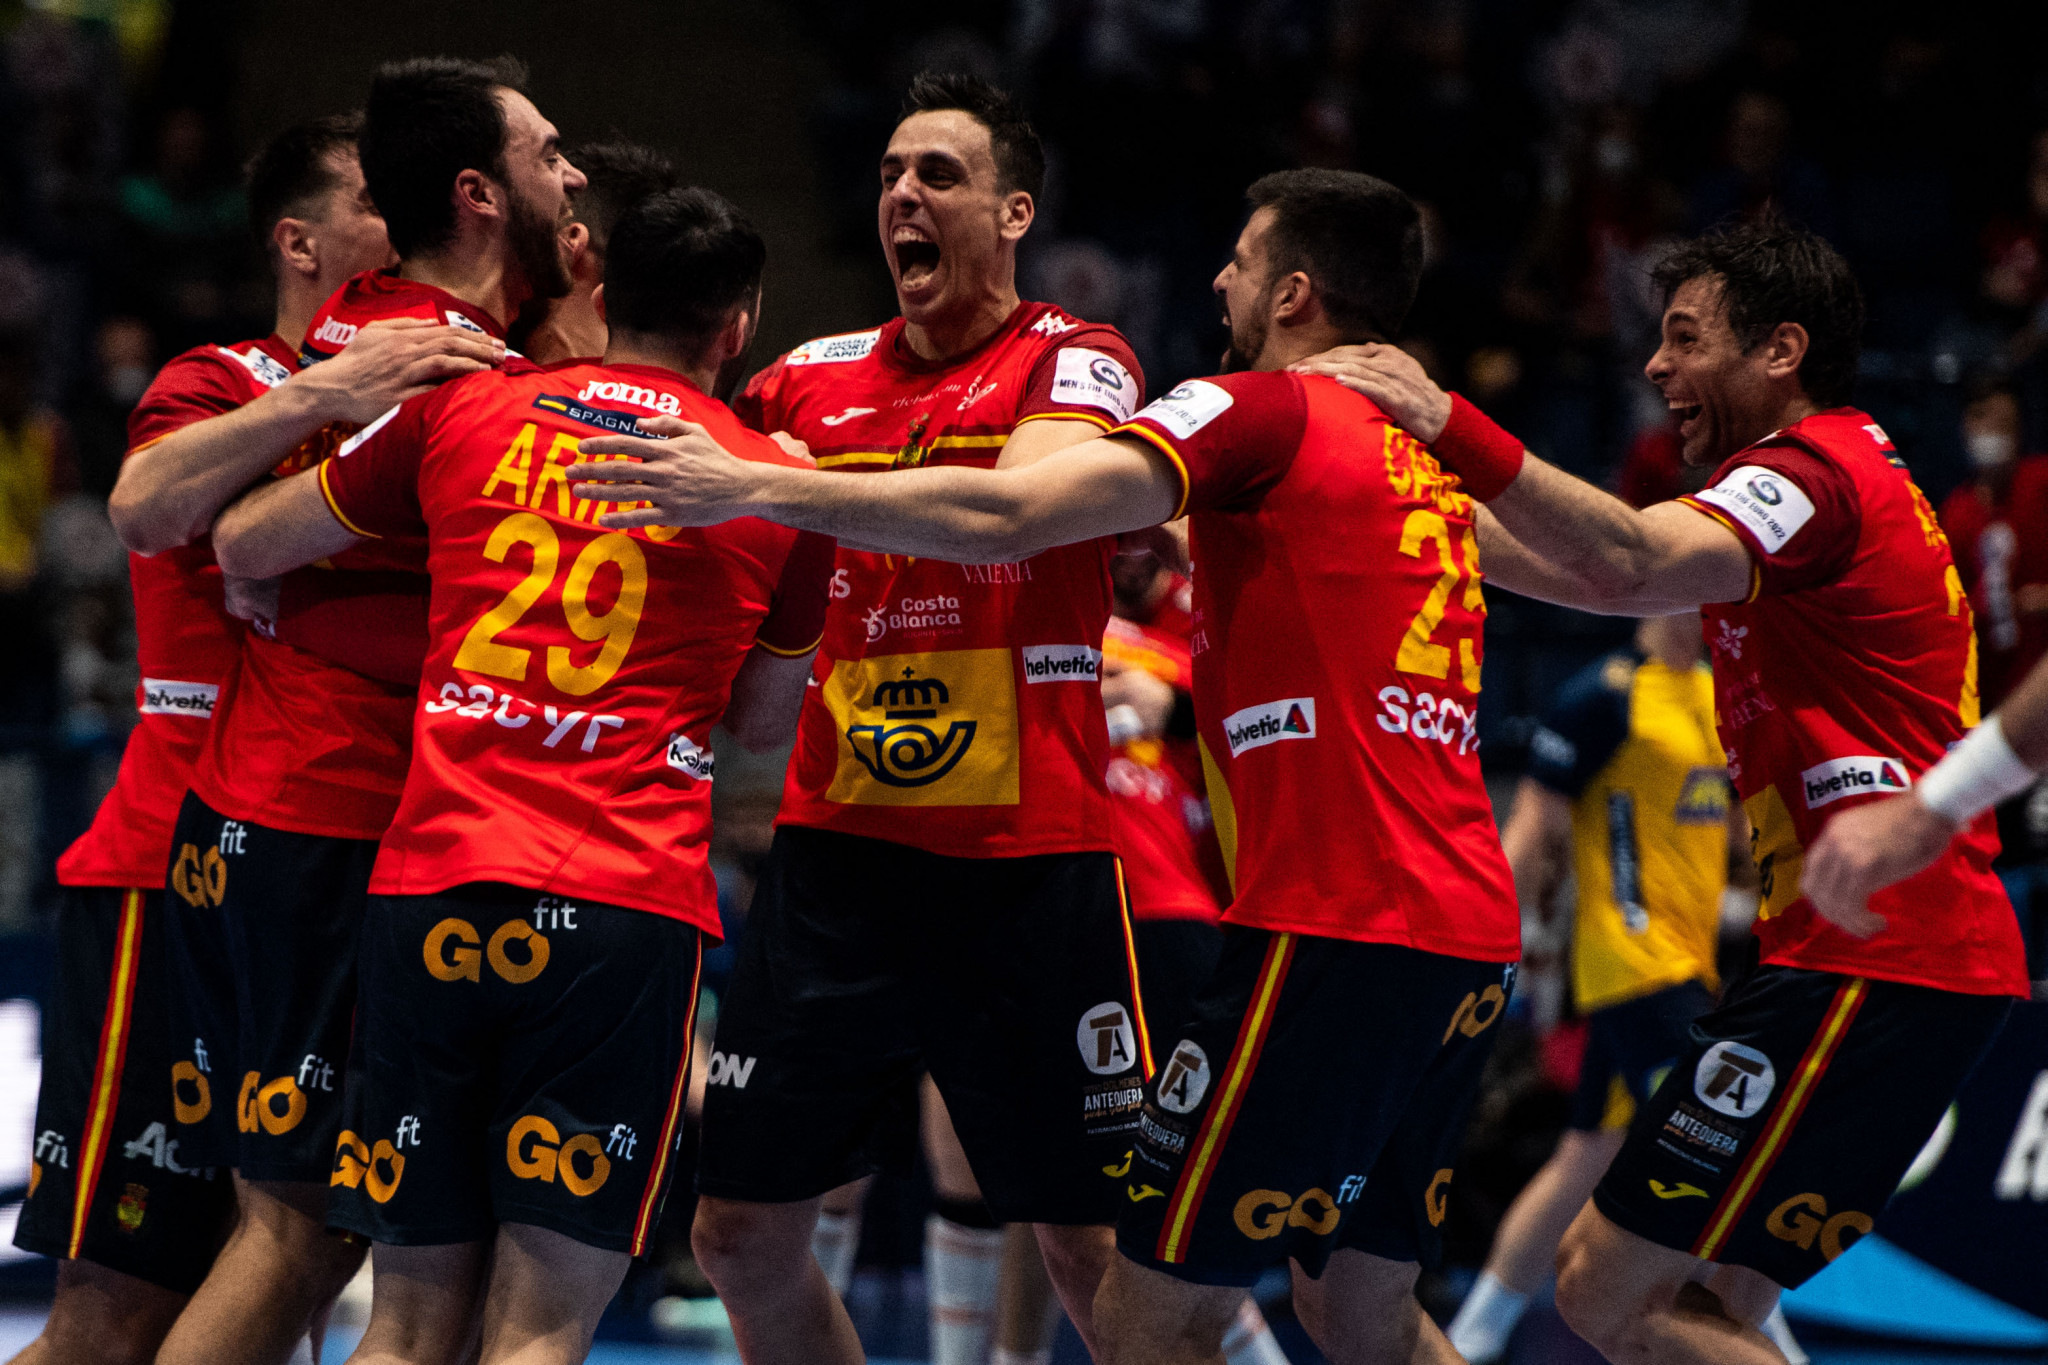 Holders Spain extended their unbeaten run at men's European Handball Championships to 17 after coming from behind to beat Russia ©Getty Images